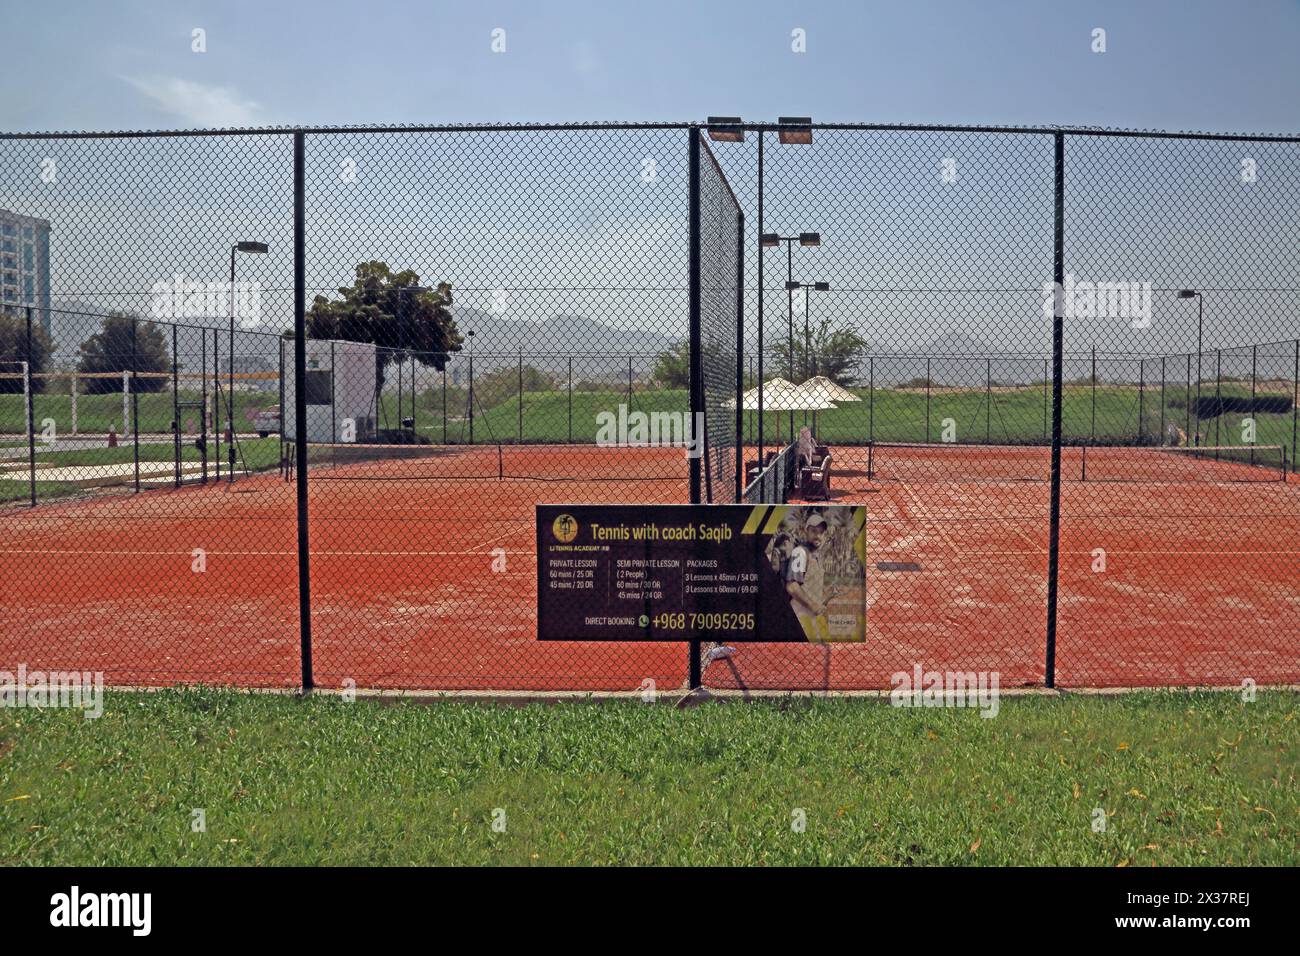 Tennis Courts at The Chedi Hotel 5 Star Luxury Resort Muscat Oman Stock Photo